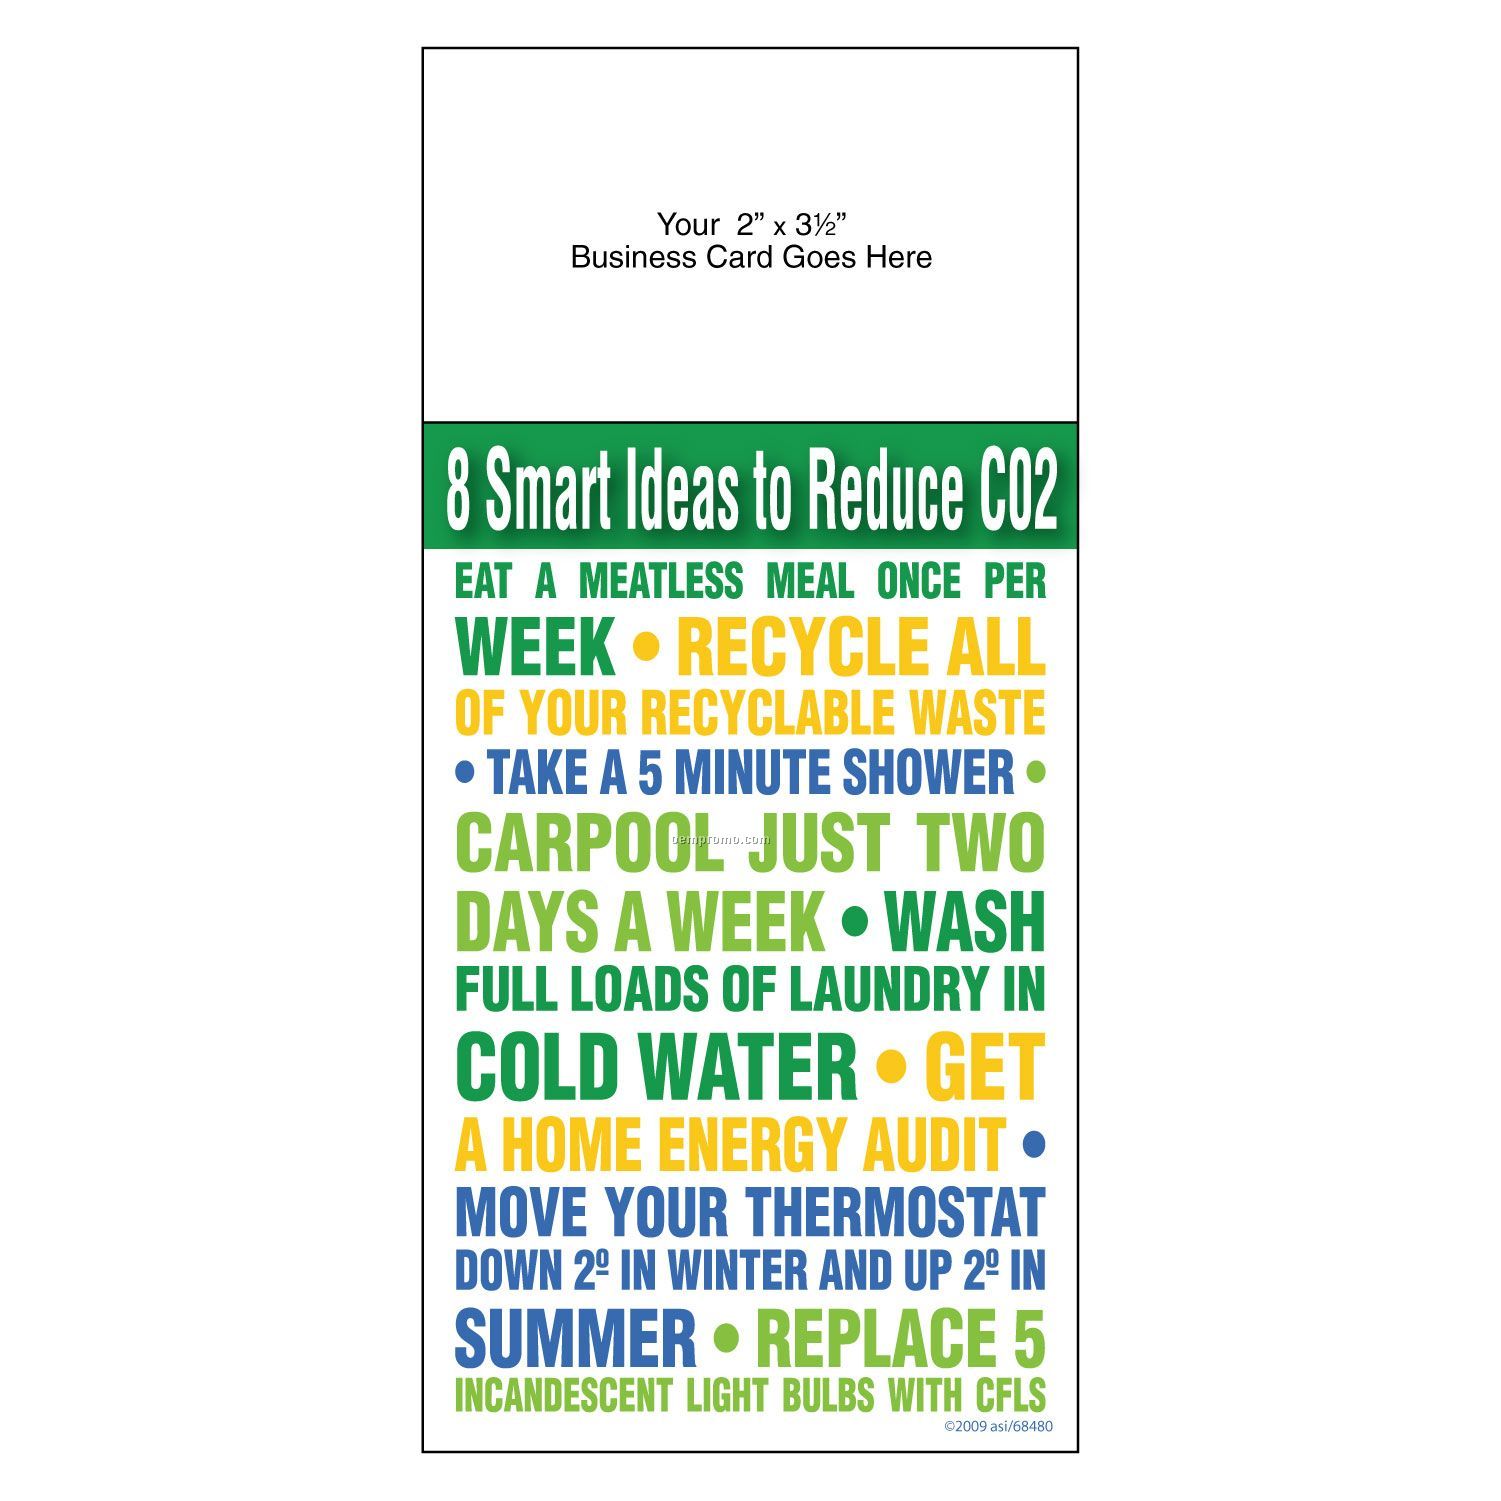 Self-adhesive Add-on Magnet + Info Card "8 Smart Ideas"